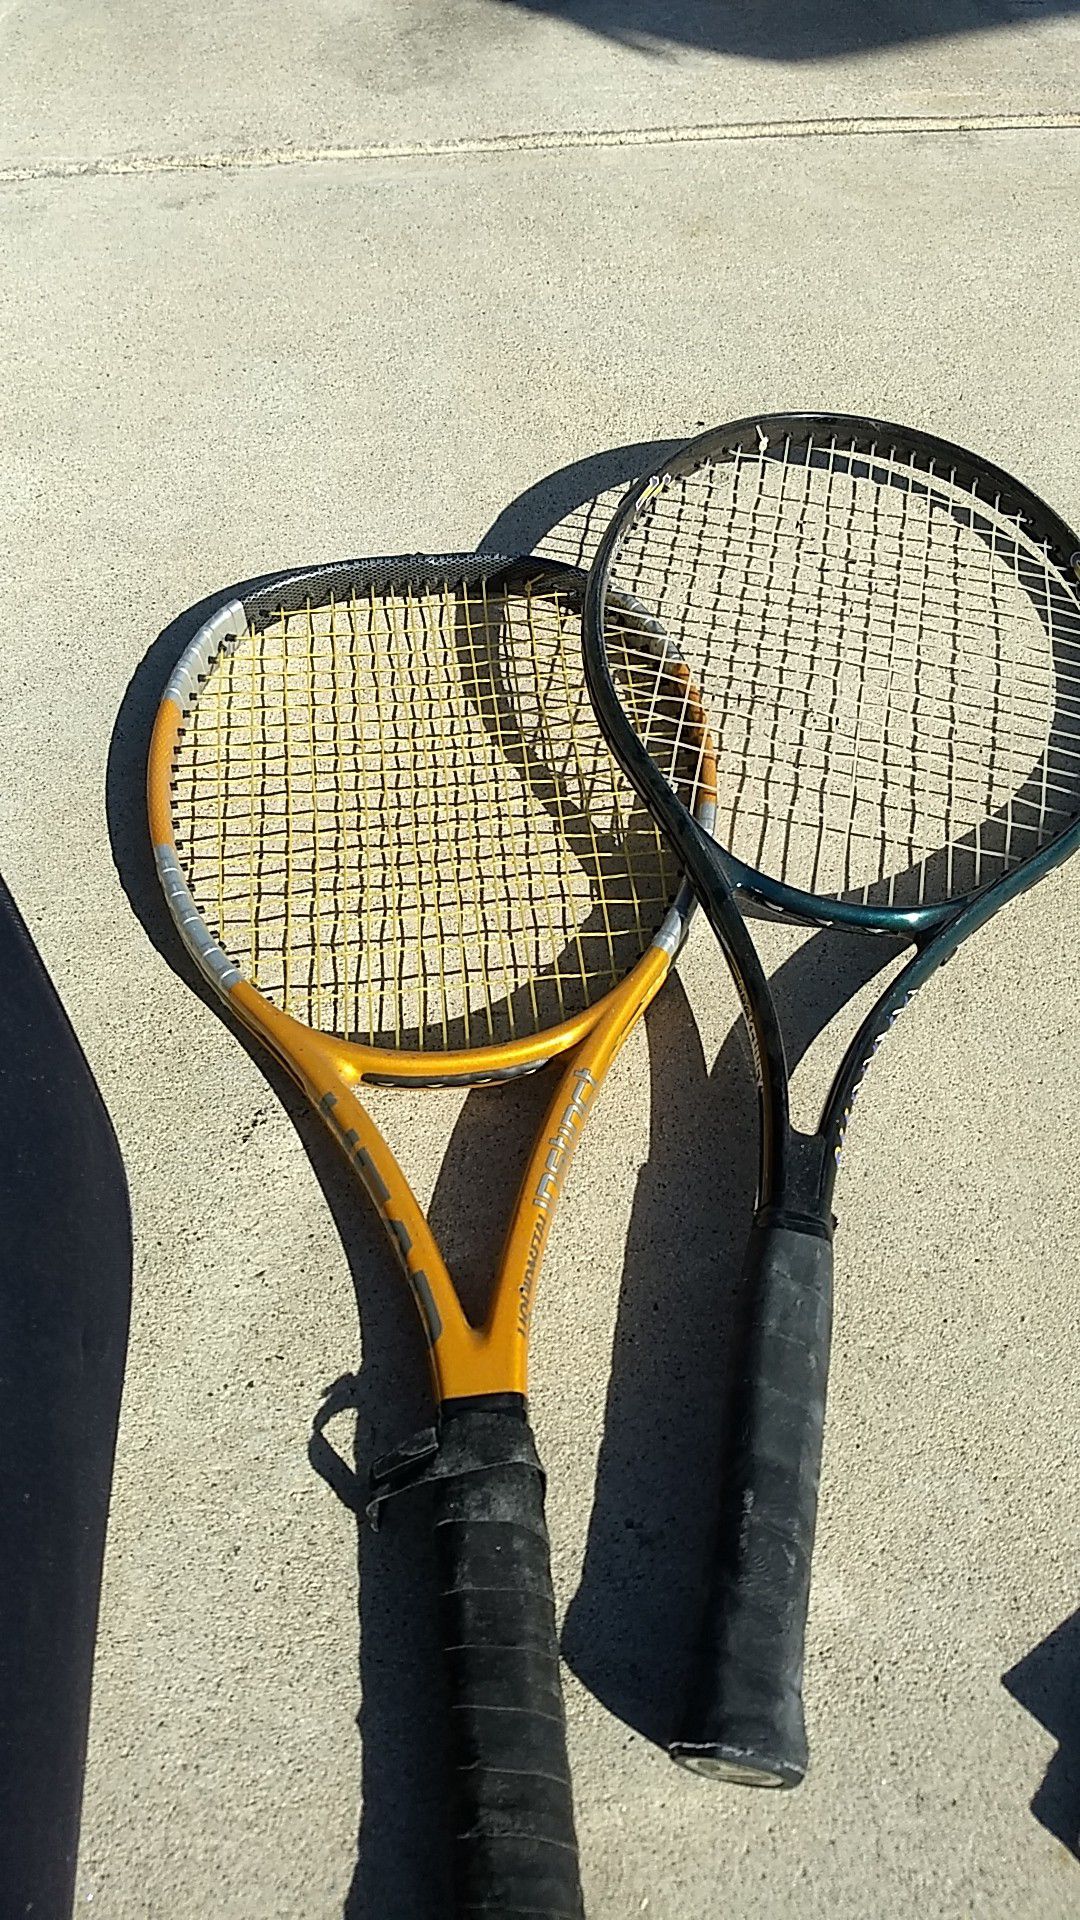 Two tennis rackets for sale with 15 tennis balls